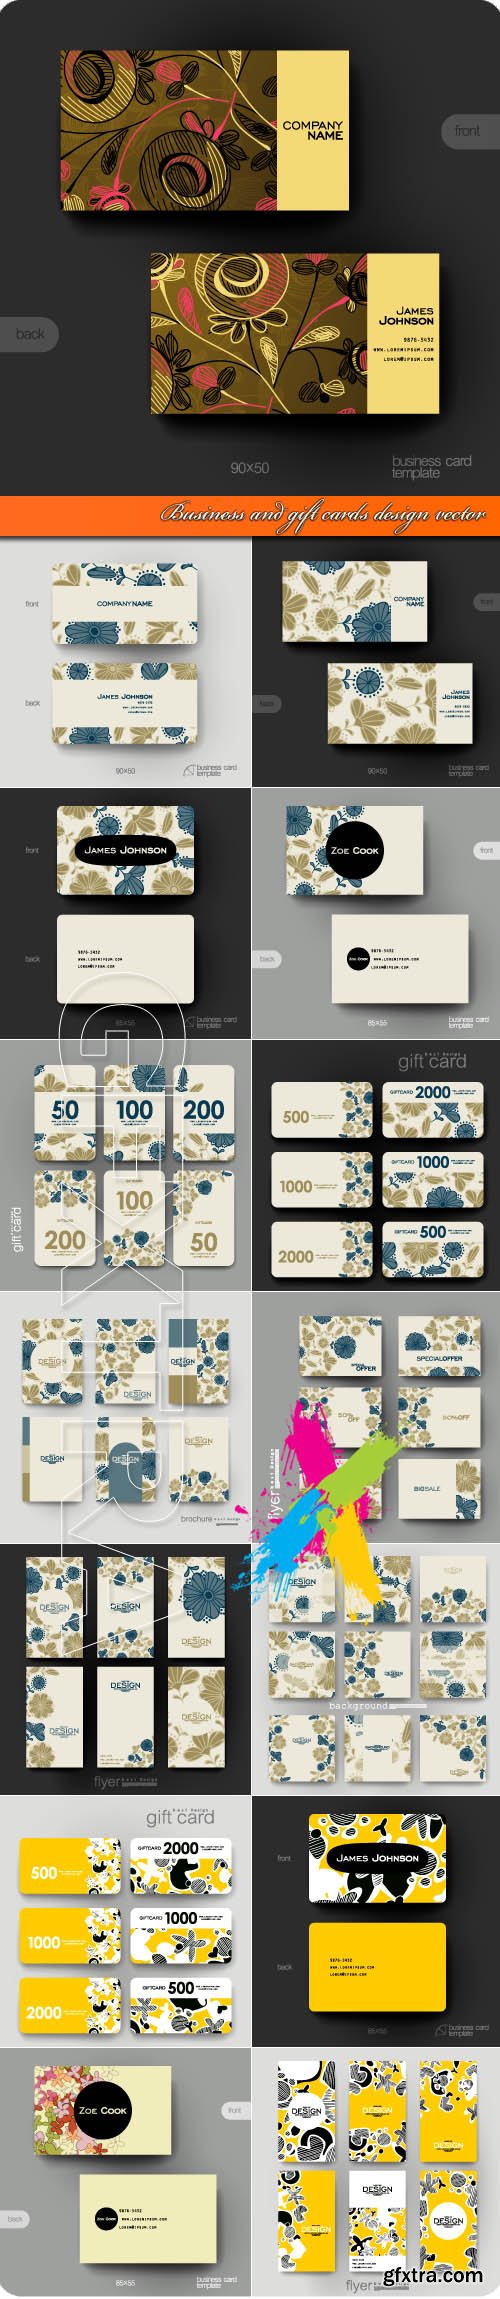 Business and gift cards design vector